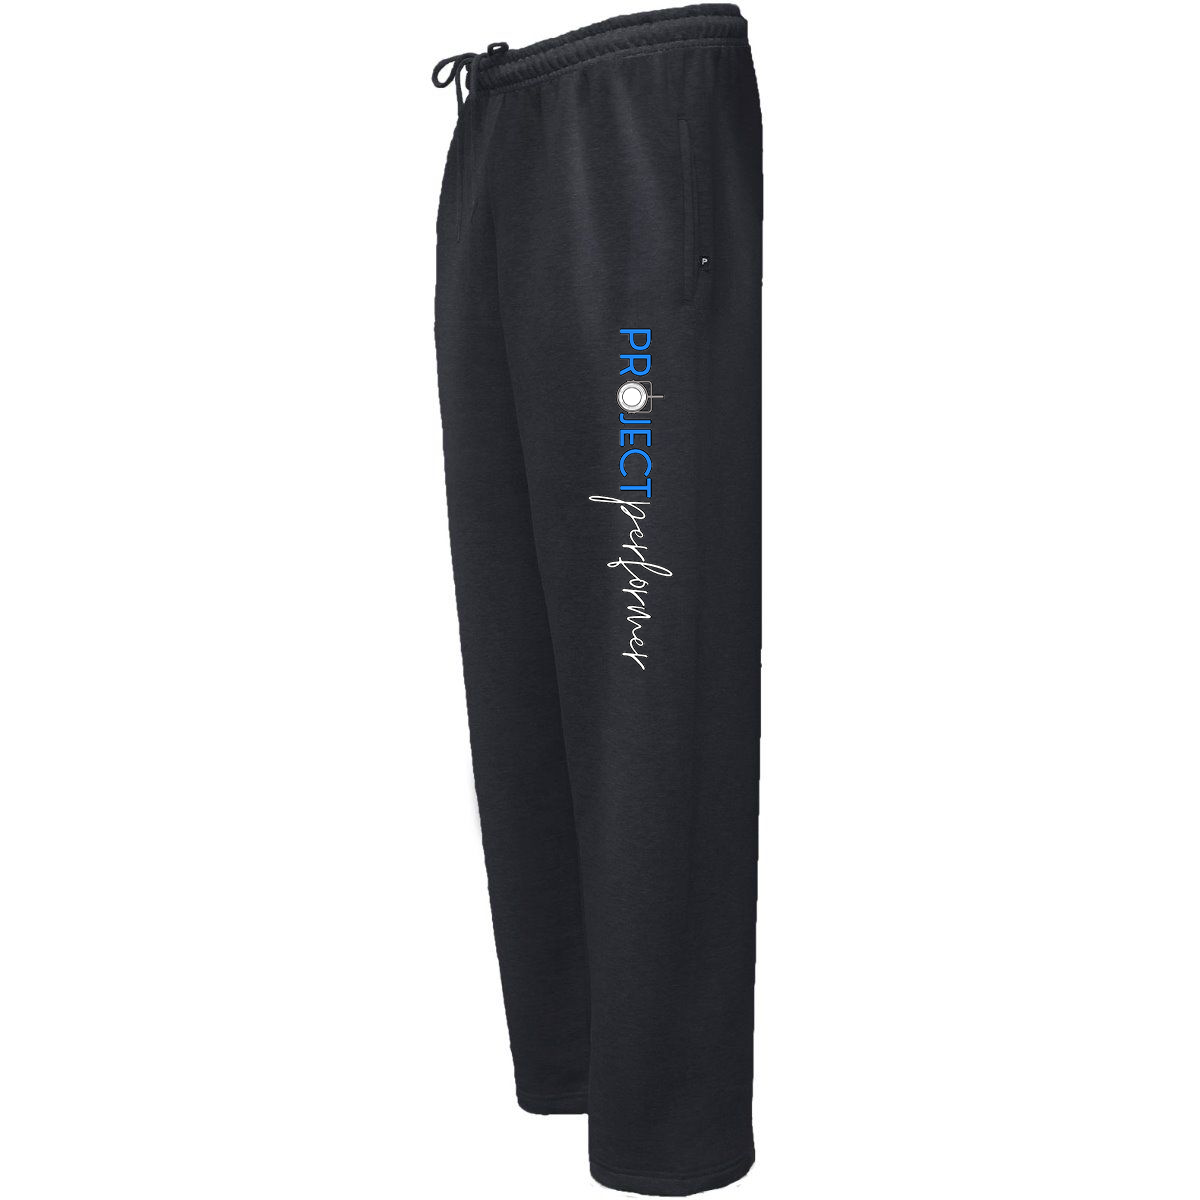 Project Performer Sweatpants